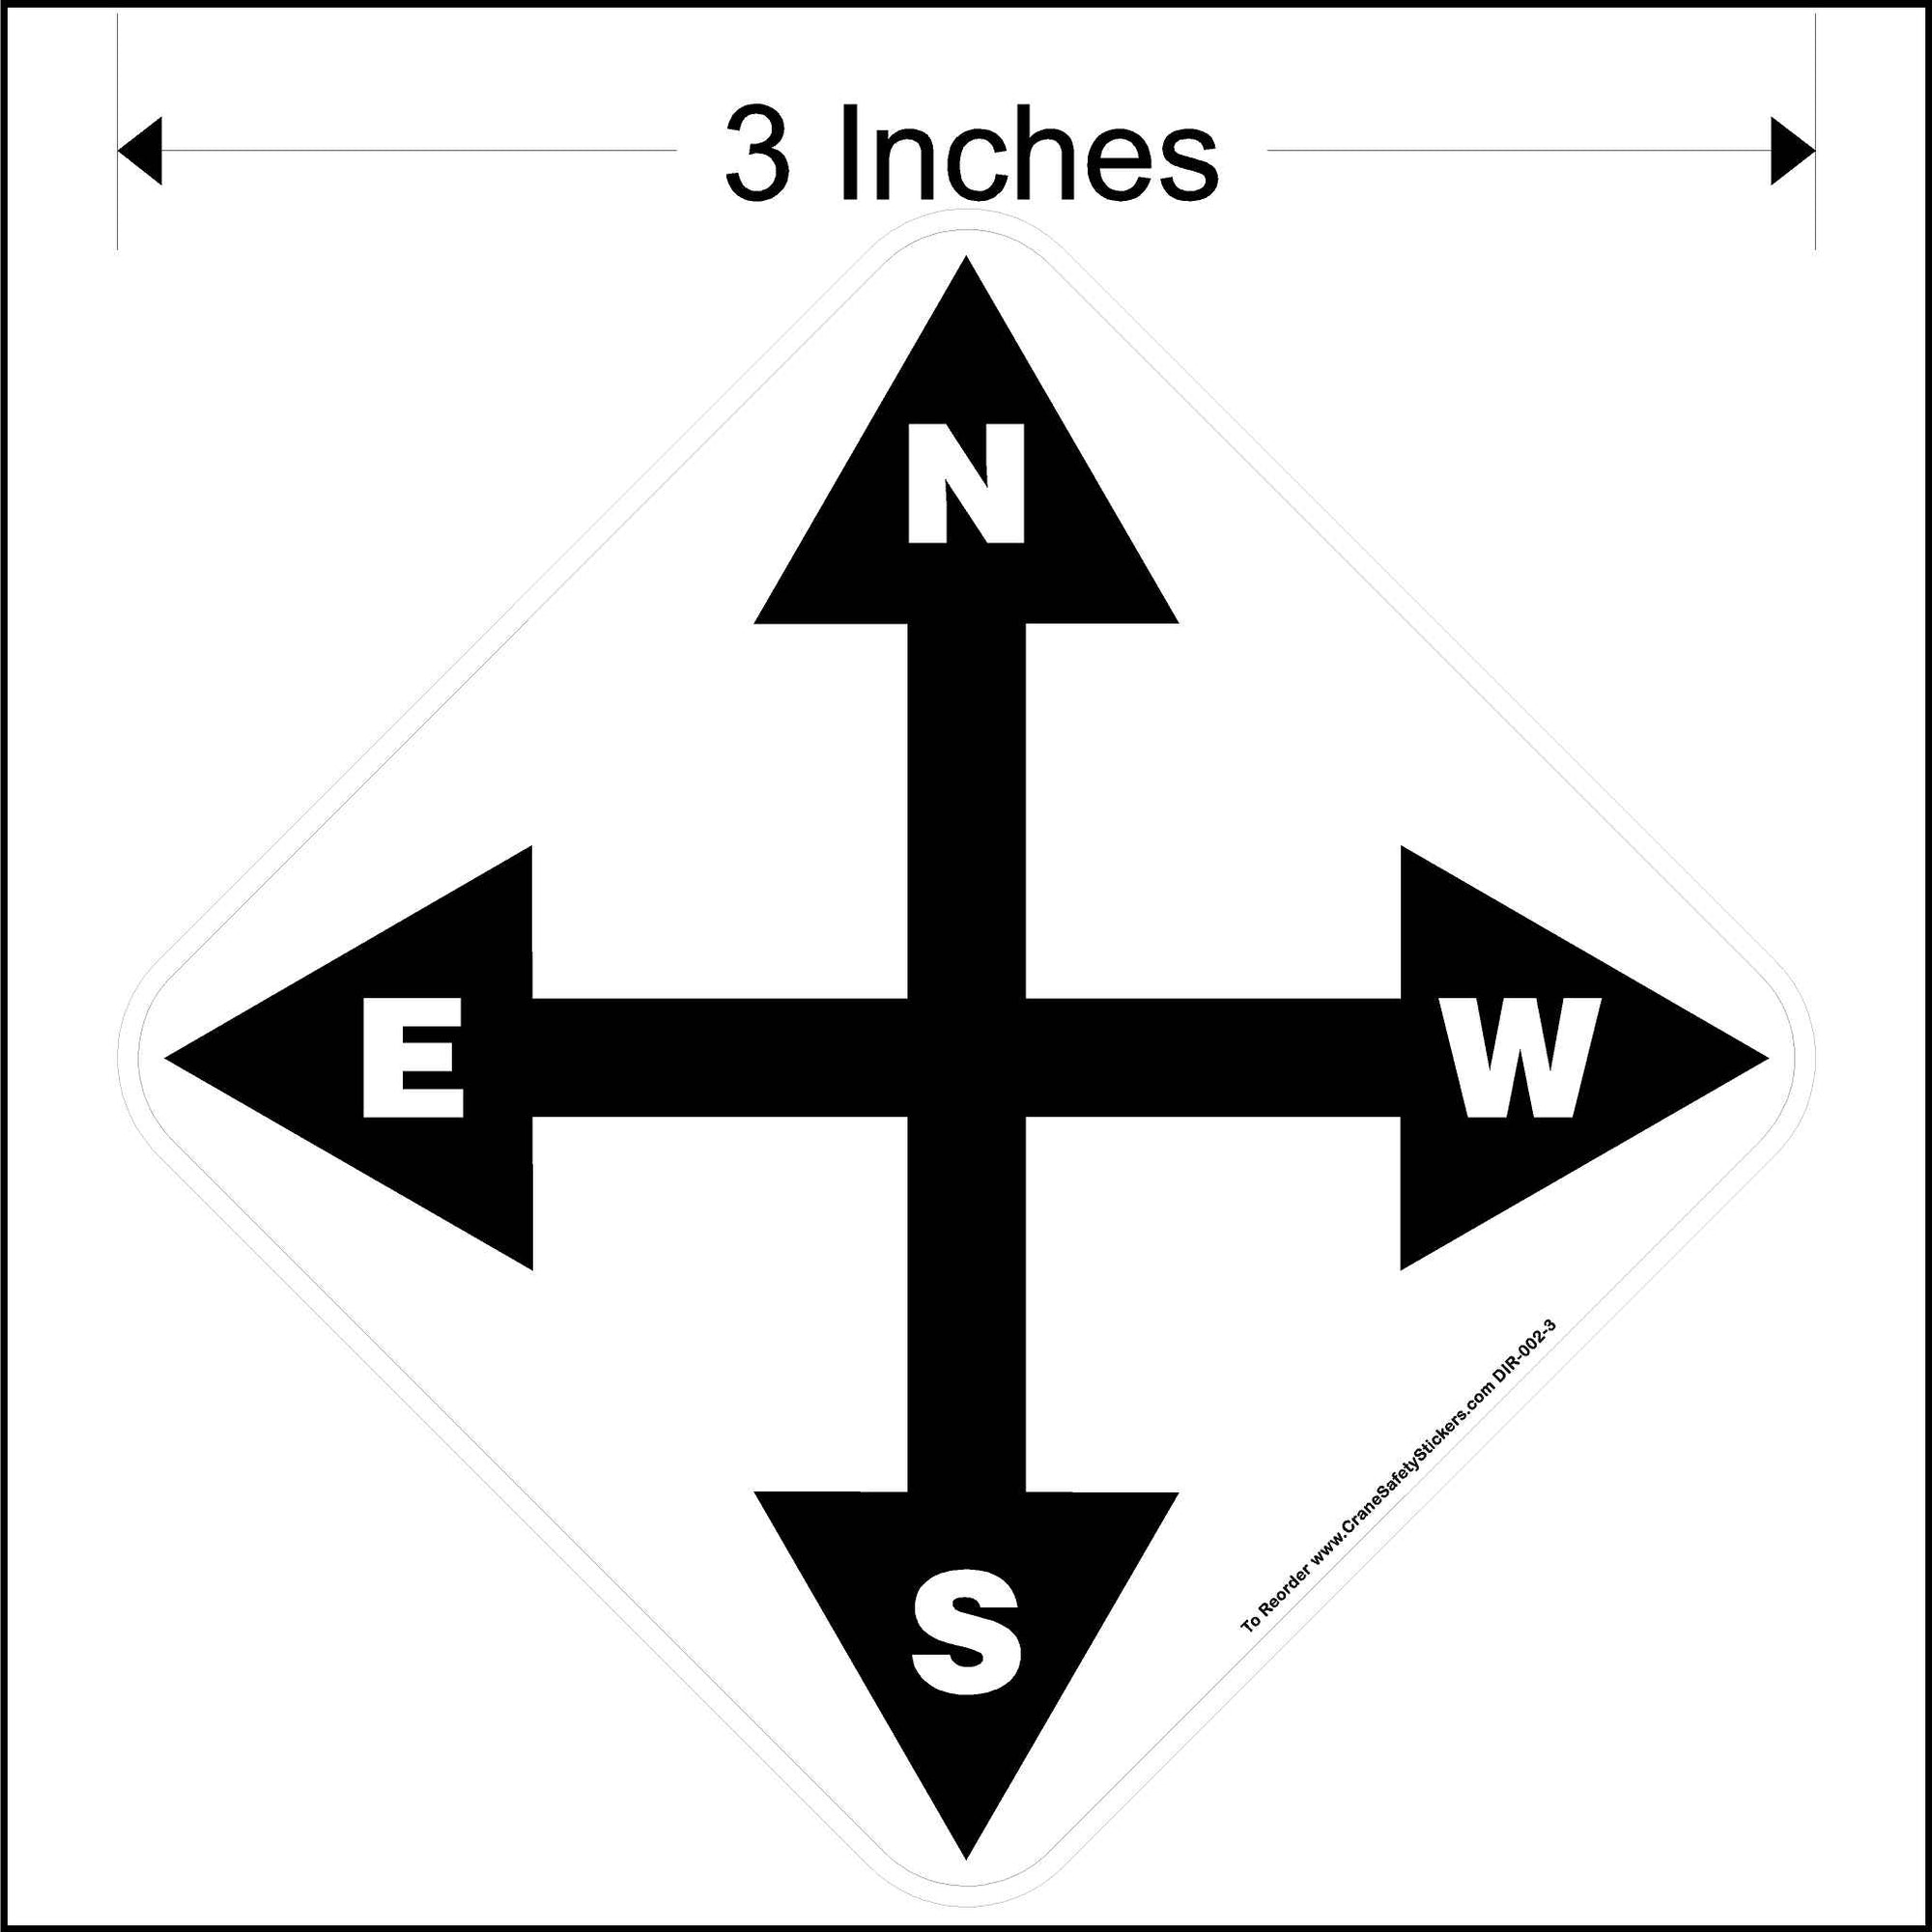 3 Inch North South West East Overhead Crane Directional Decal.